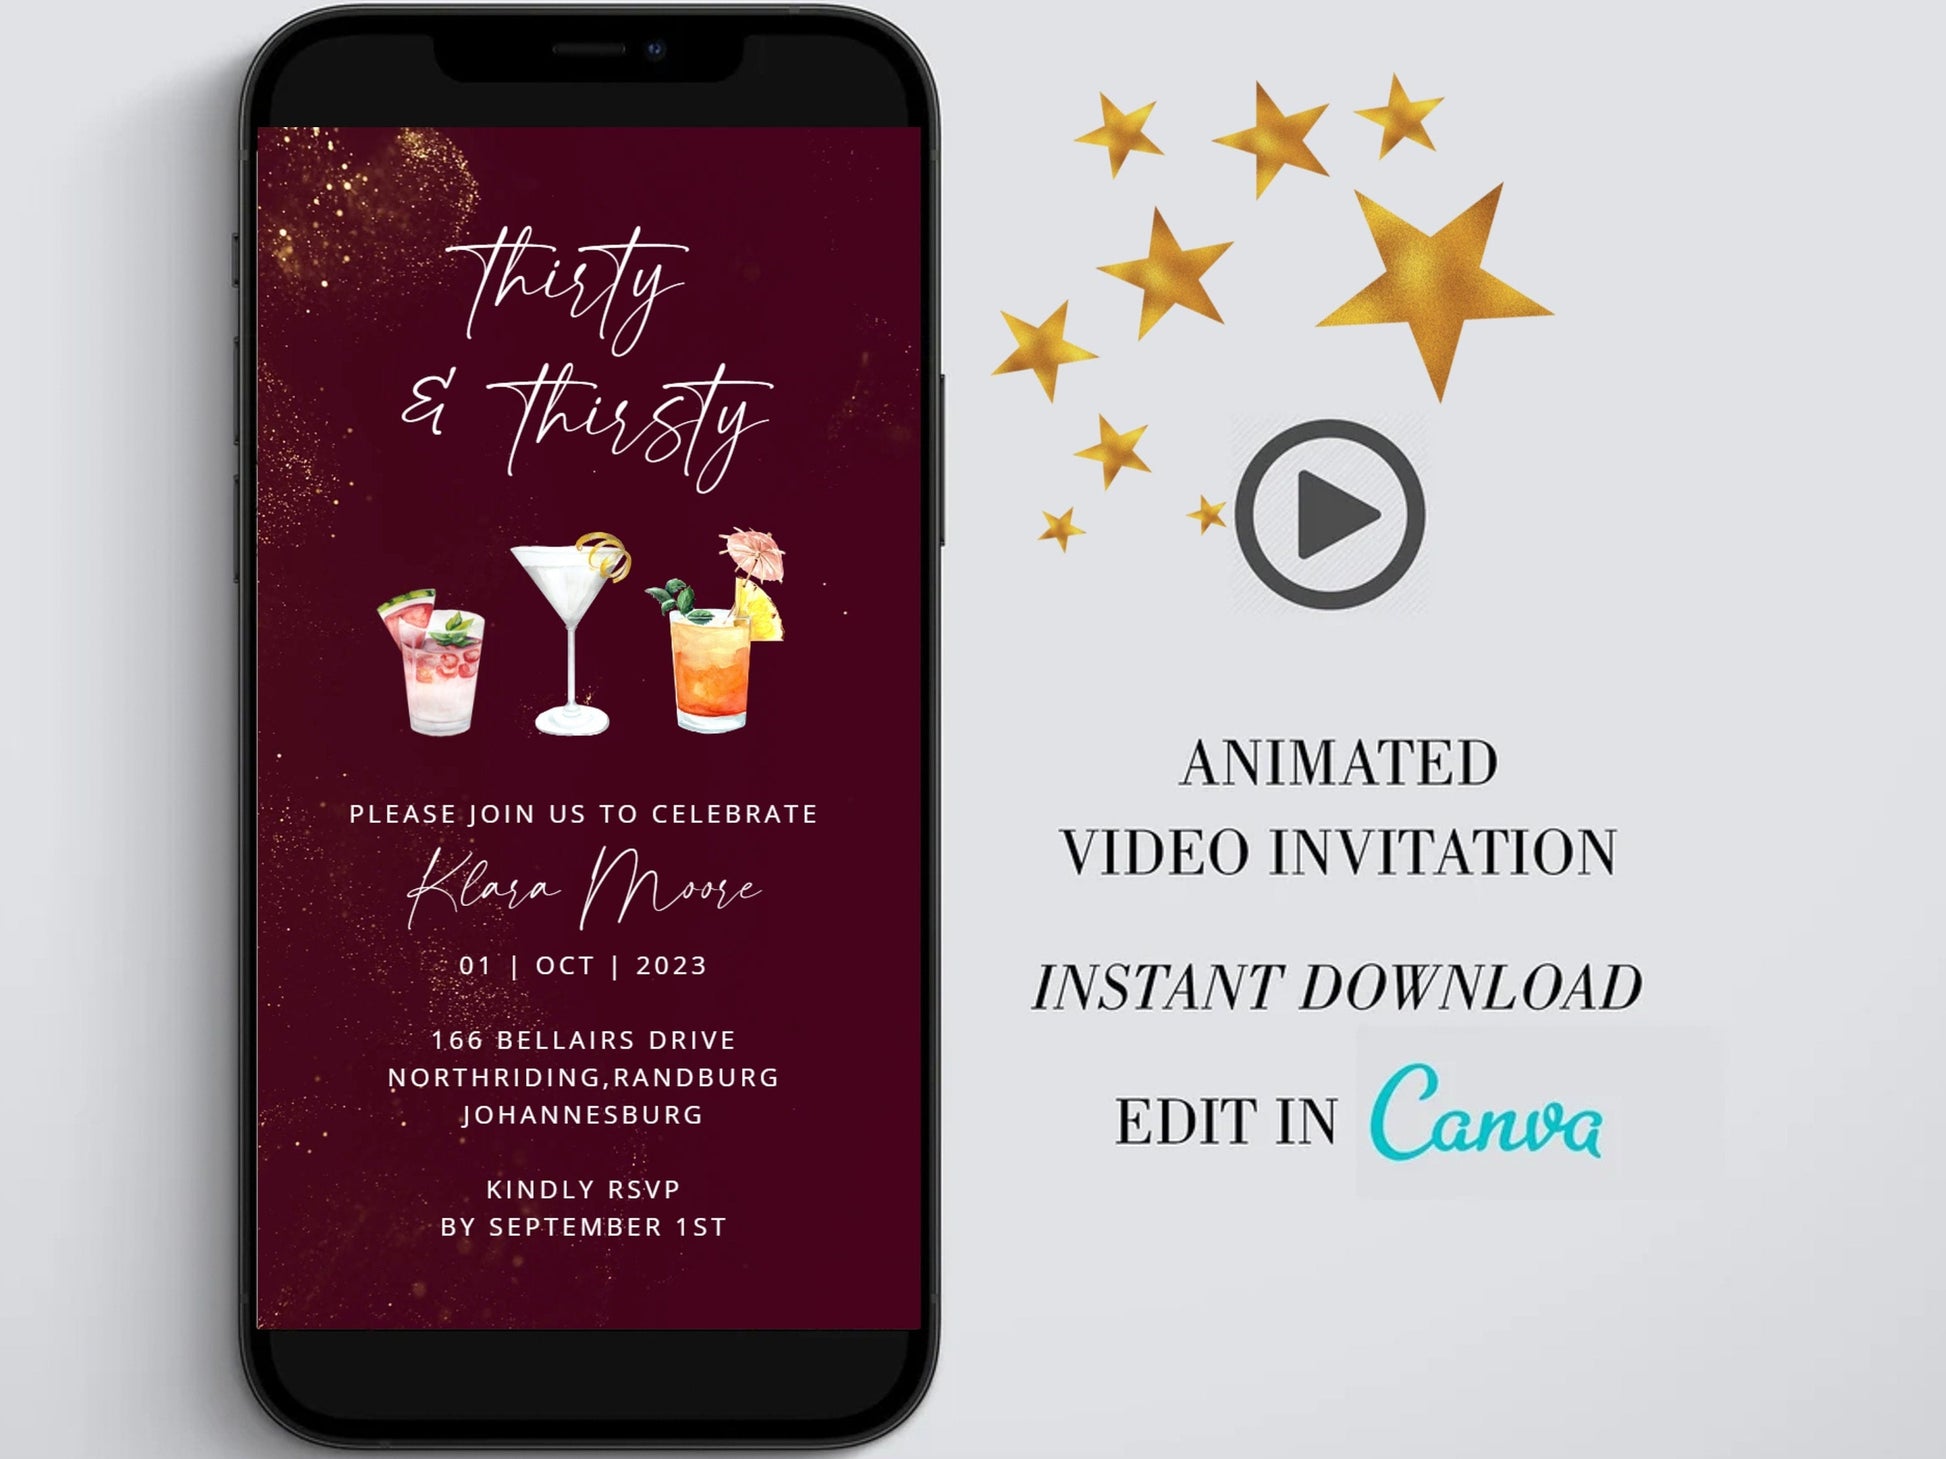 Thirty and thirsty Digital Birthday Invitation template, Cocktail Electronic Birthday Evite, Edit in Canva, Any Age, Instant Download SAVVY PAPER CO